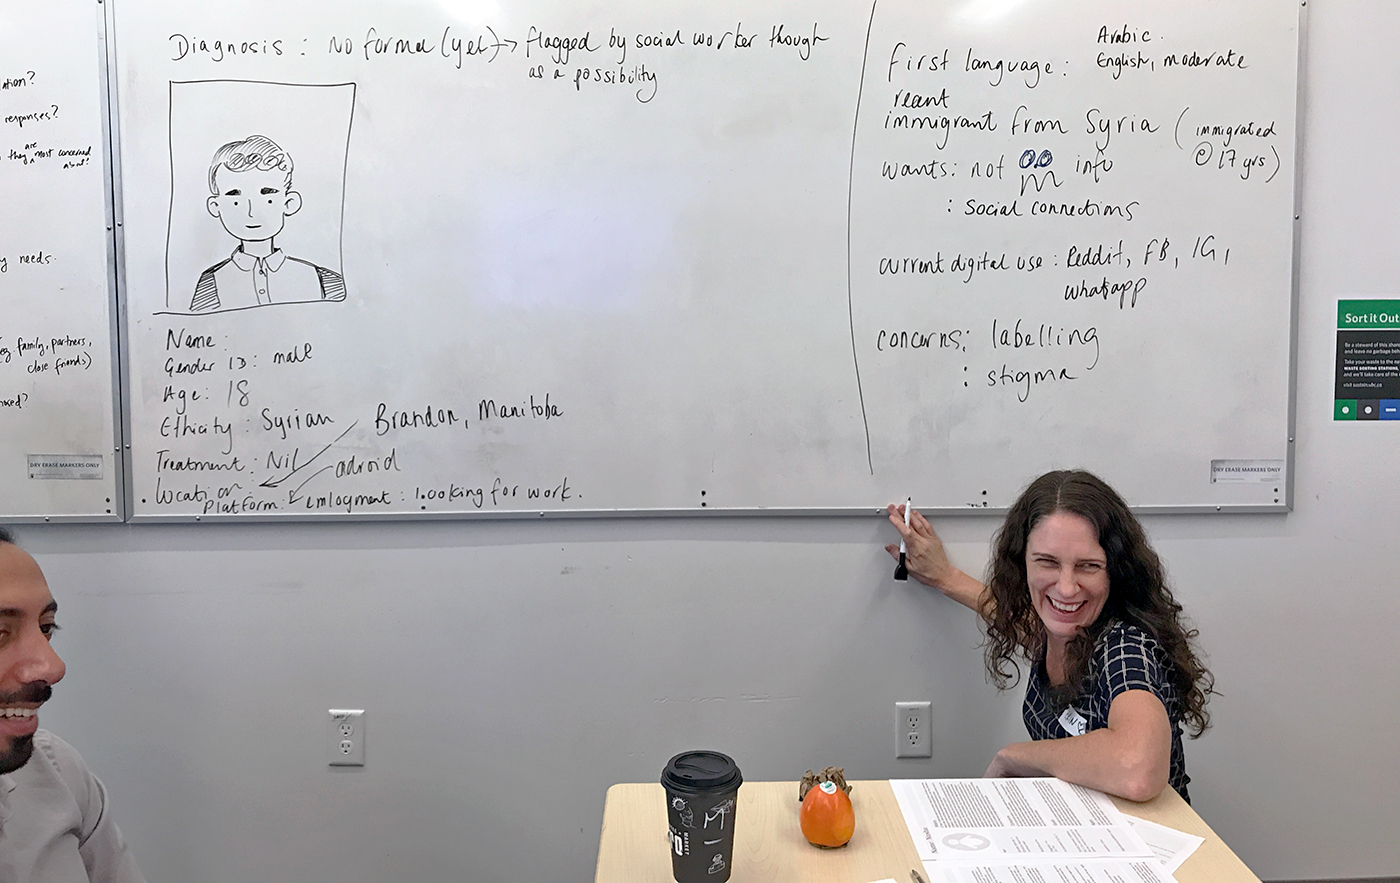 Erin does some whiteboarding while Aidin smiles. She's filling out a persona template for an 18-year old Syrian immigrant.